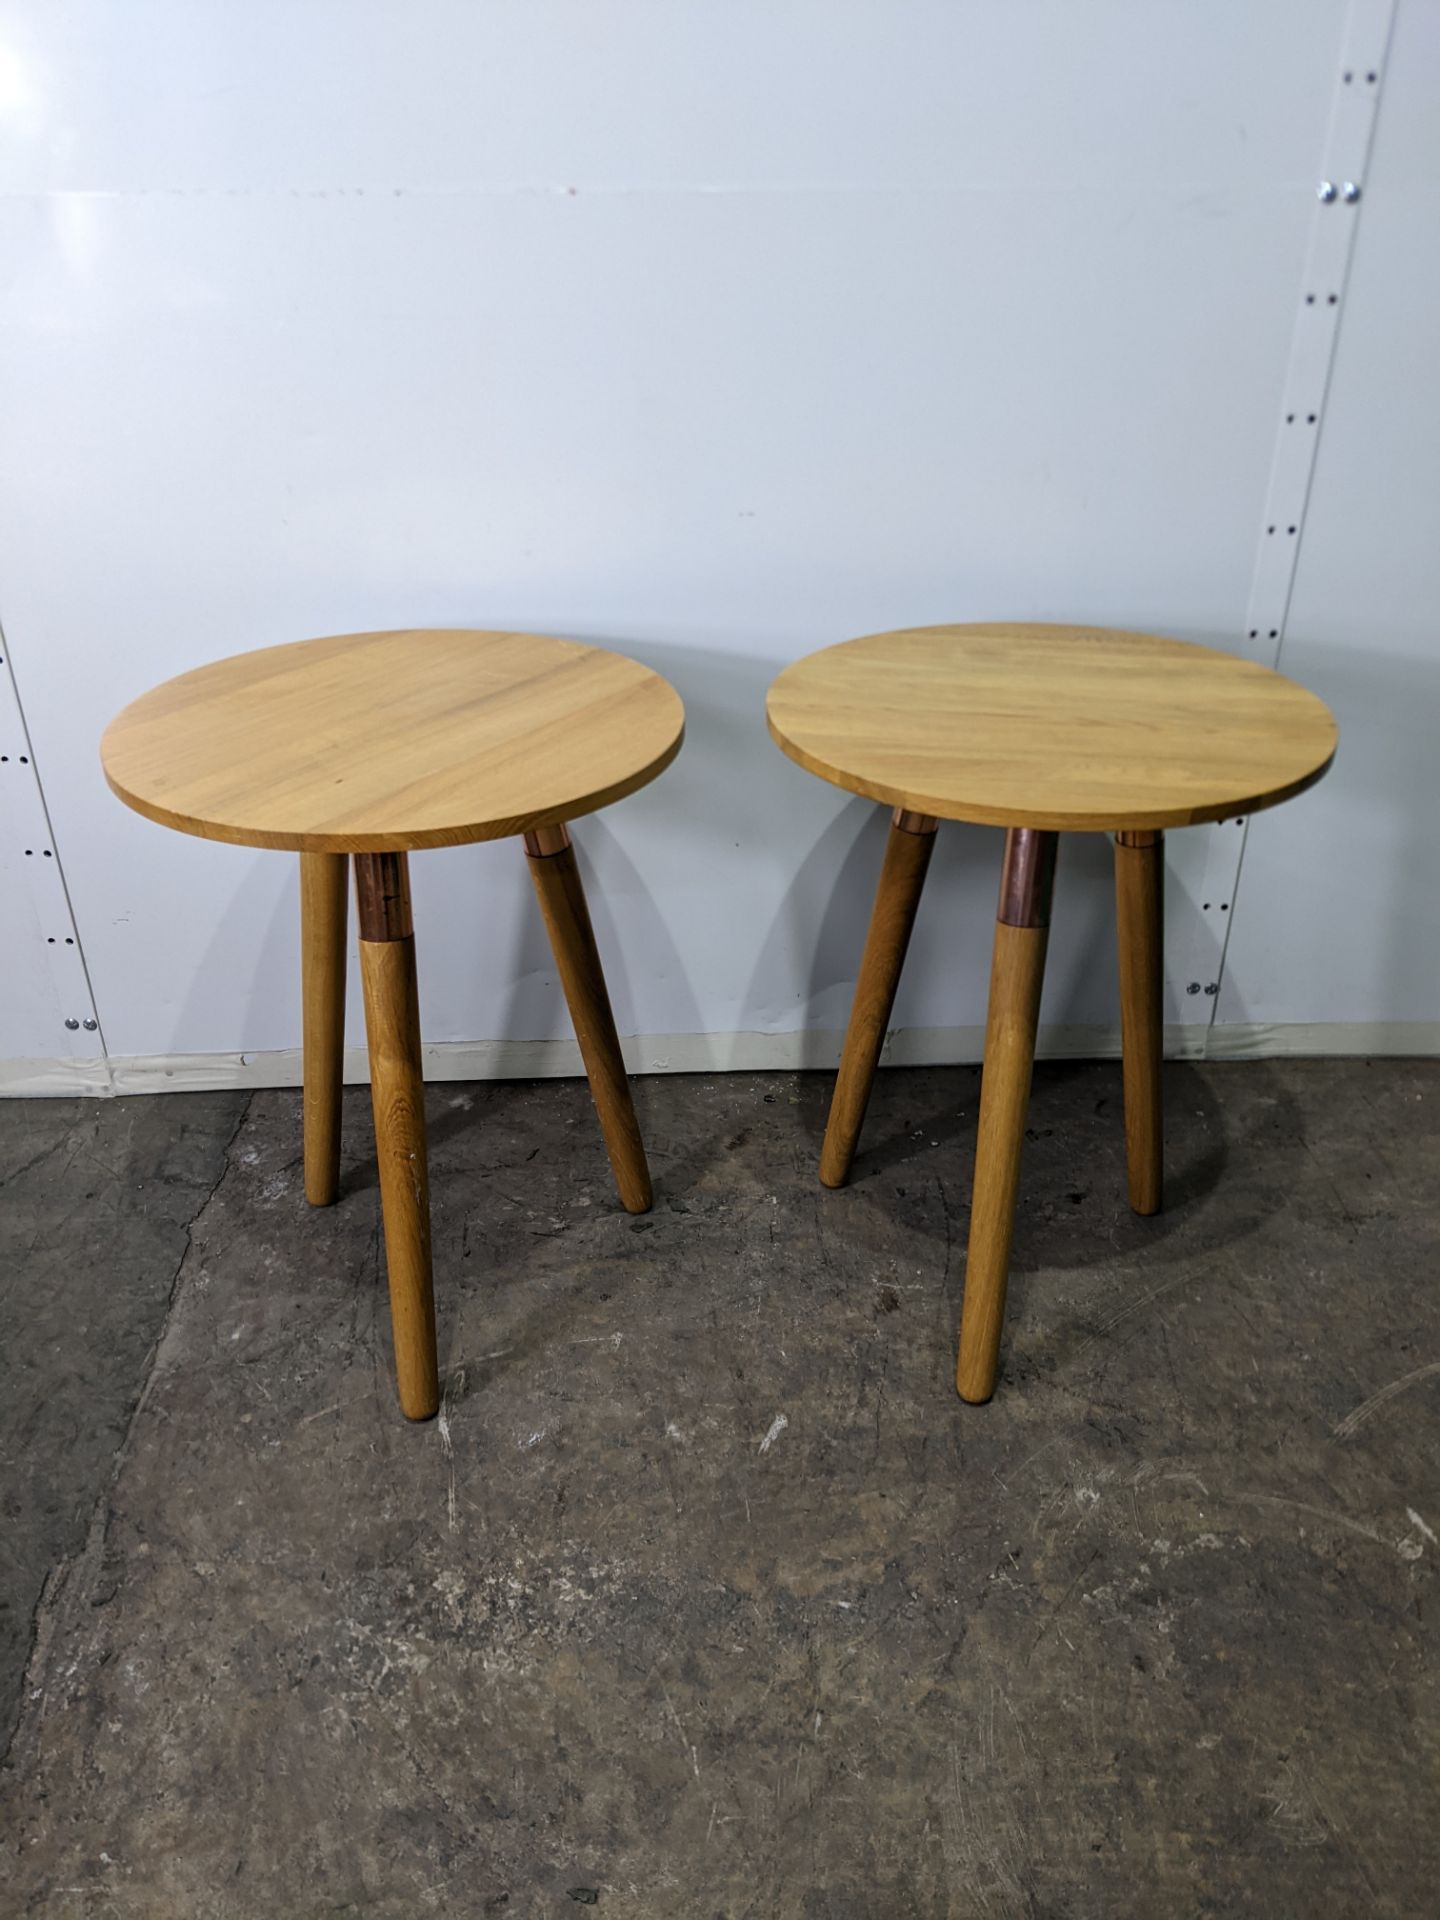 2 x Round Wooden 3 Legged Side Tables